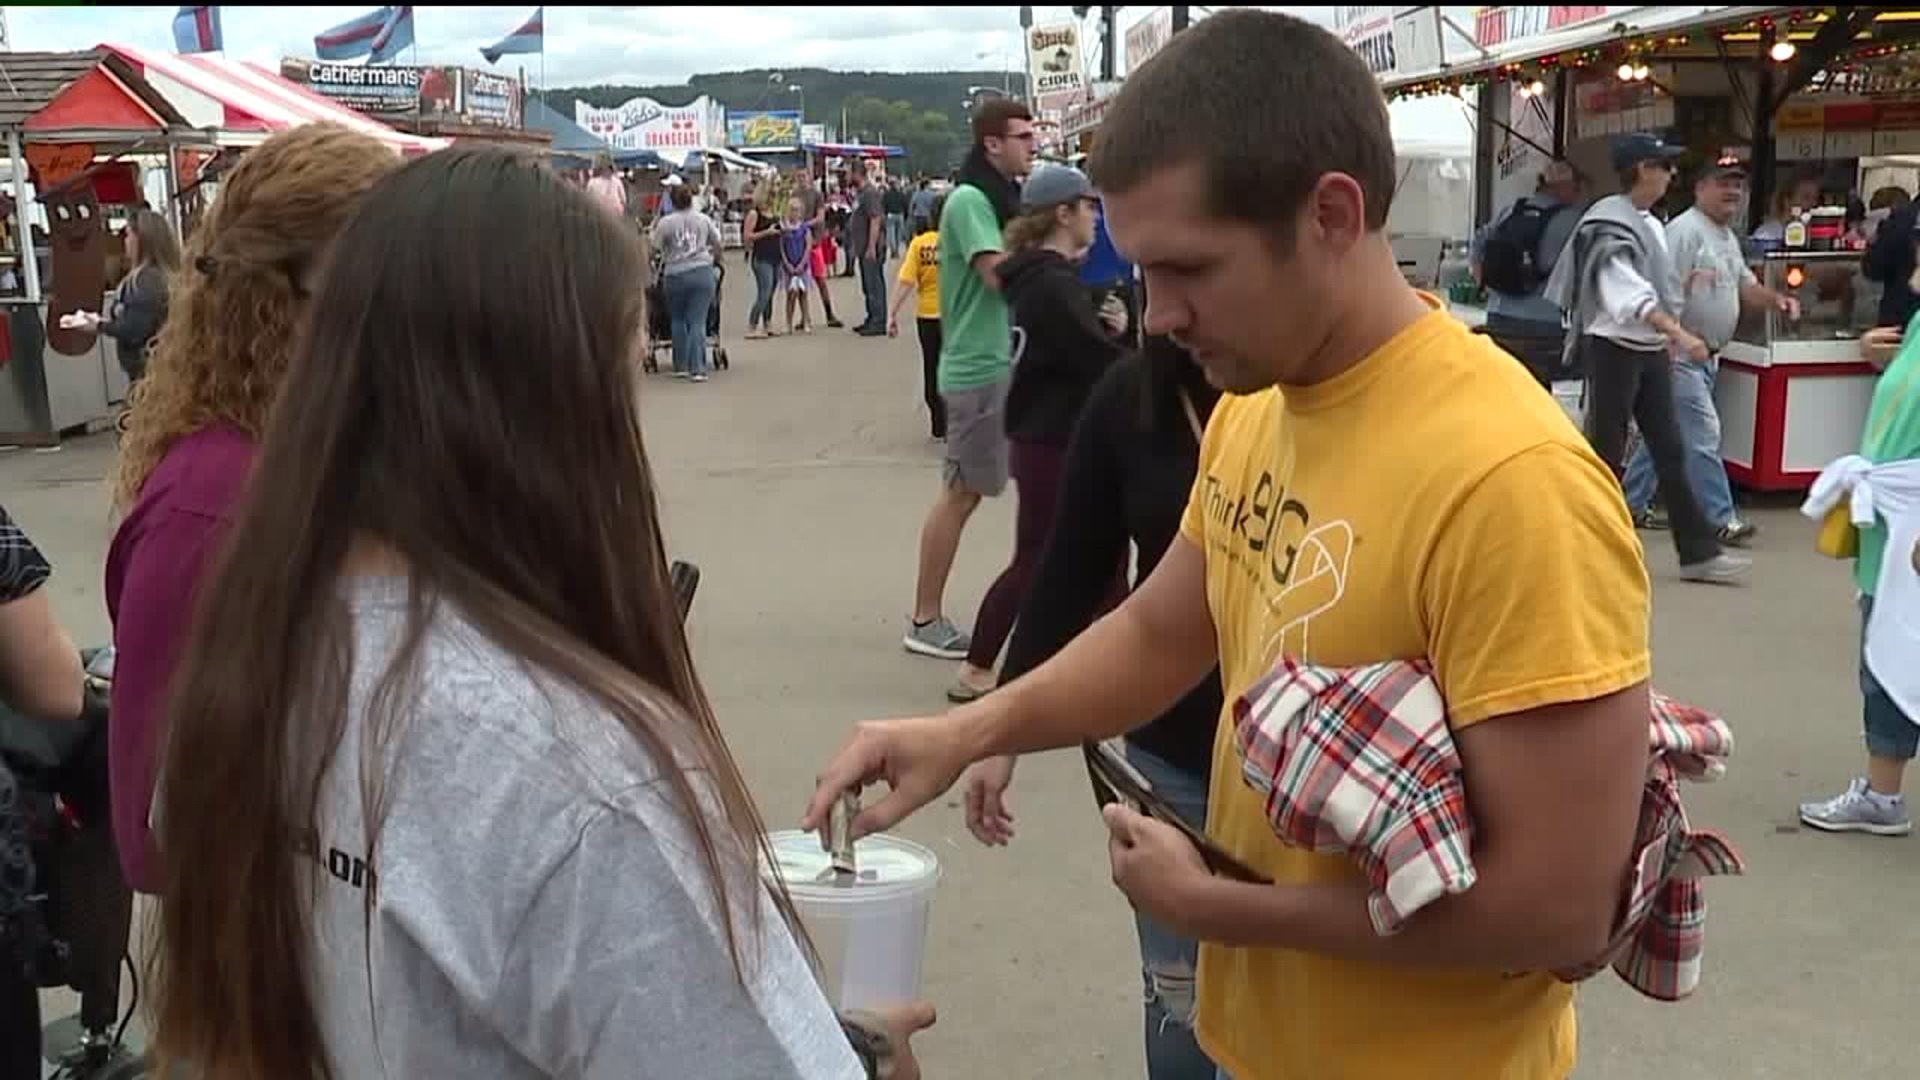 Colleges Against Cancer Accepting Donations at the Bloomsburg Fair